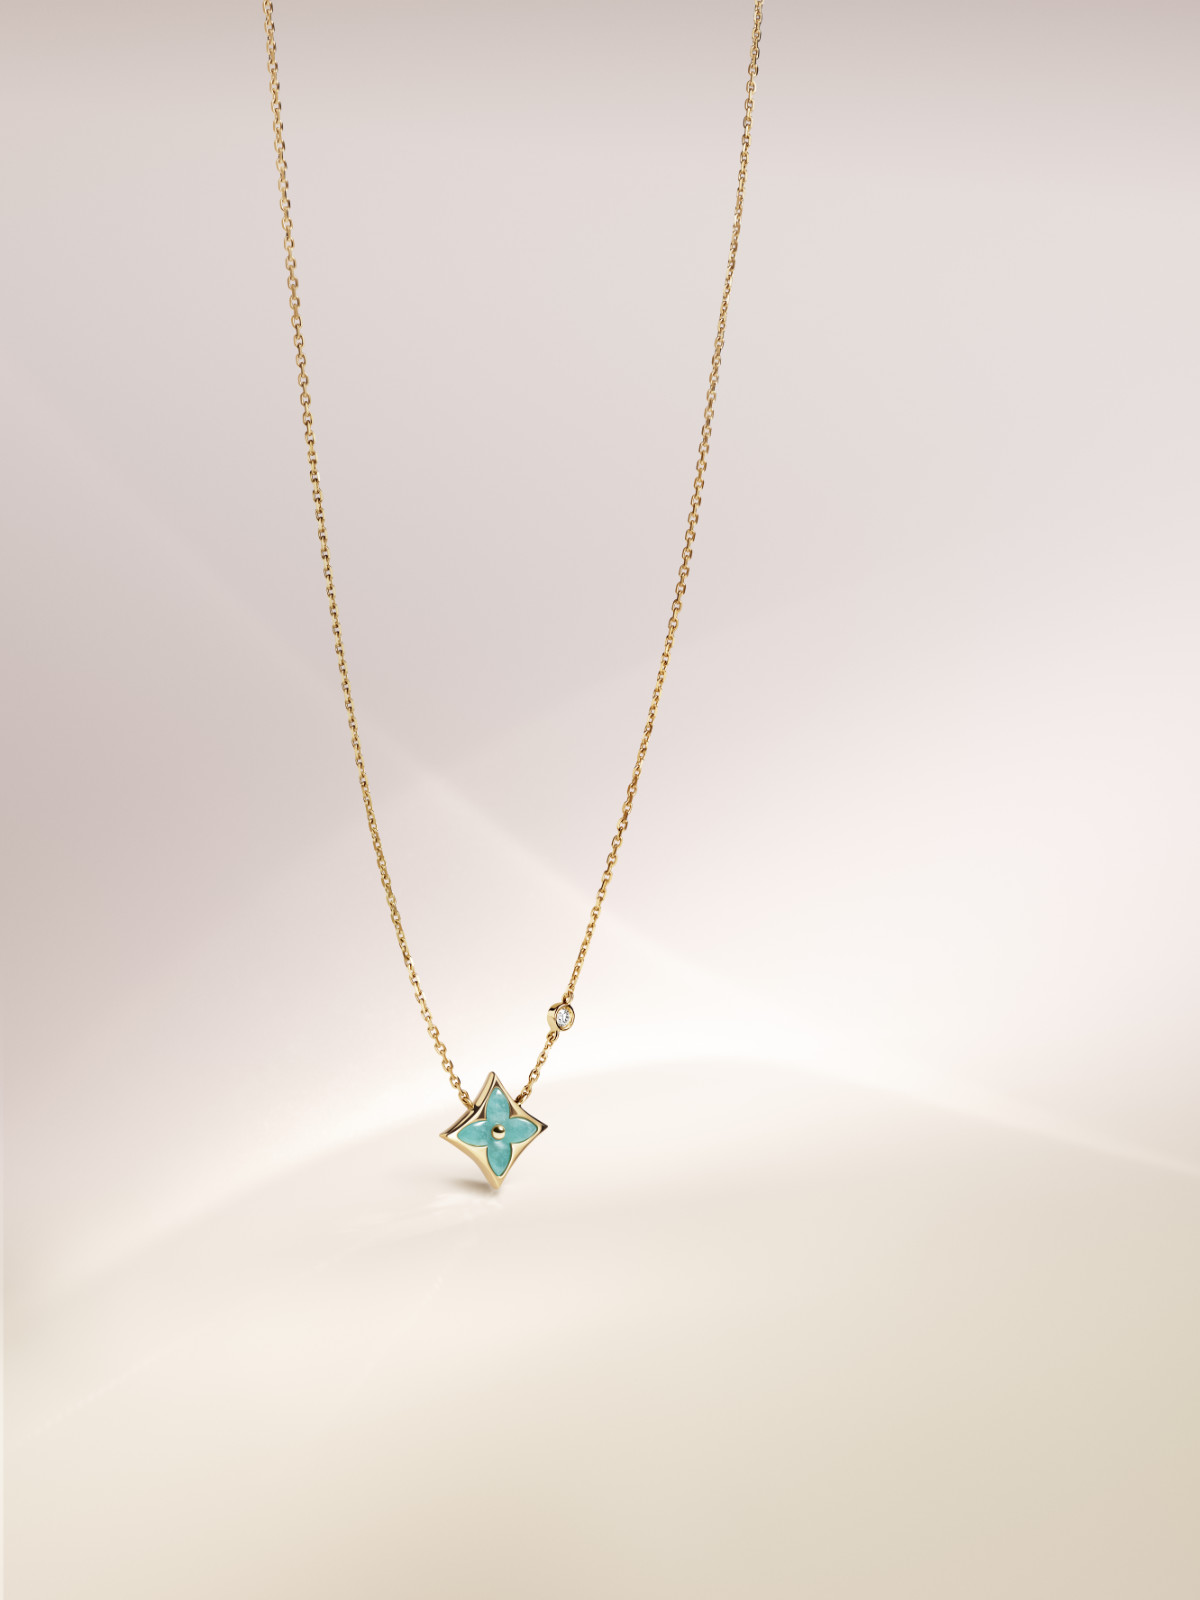 Amazonite, A Novel New Ornamental Stone In The Louis Vuitton Color Blossom Collection